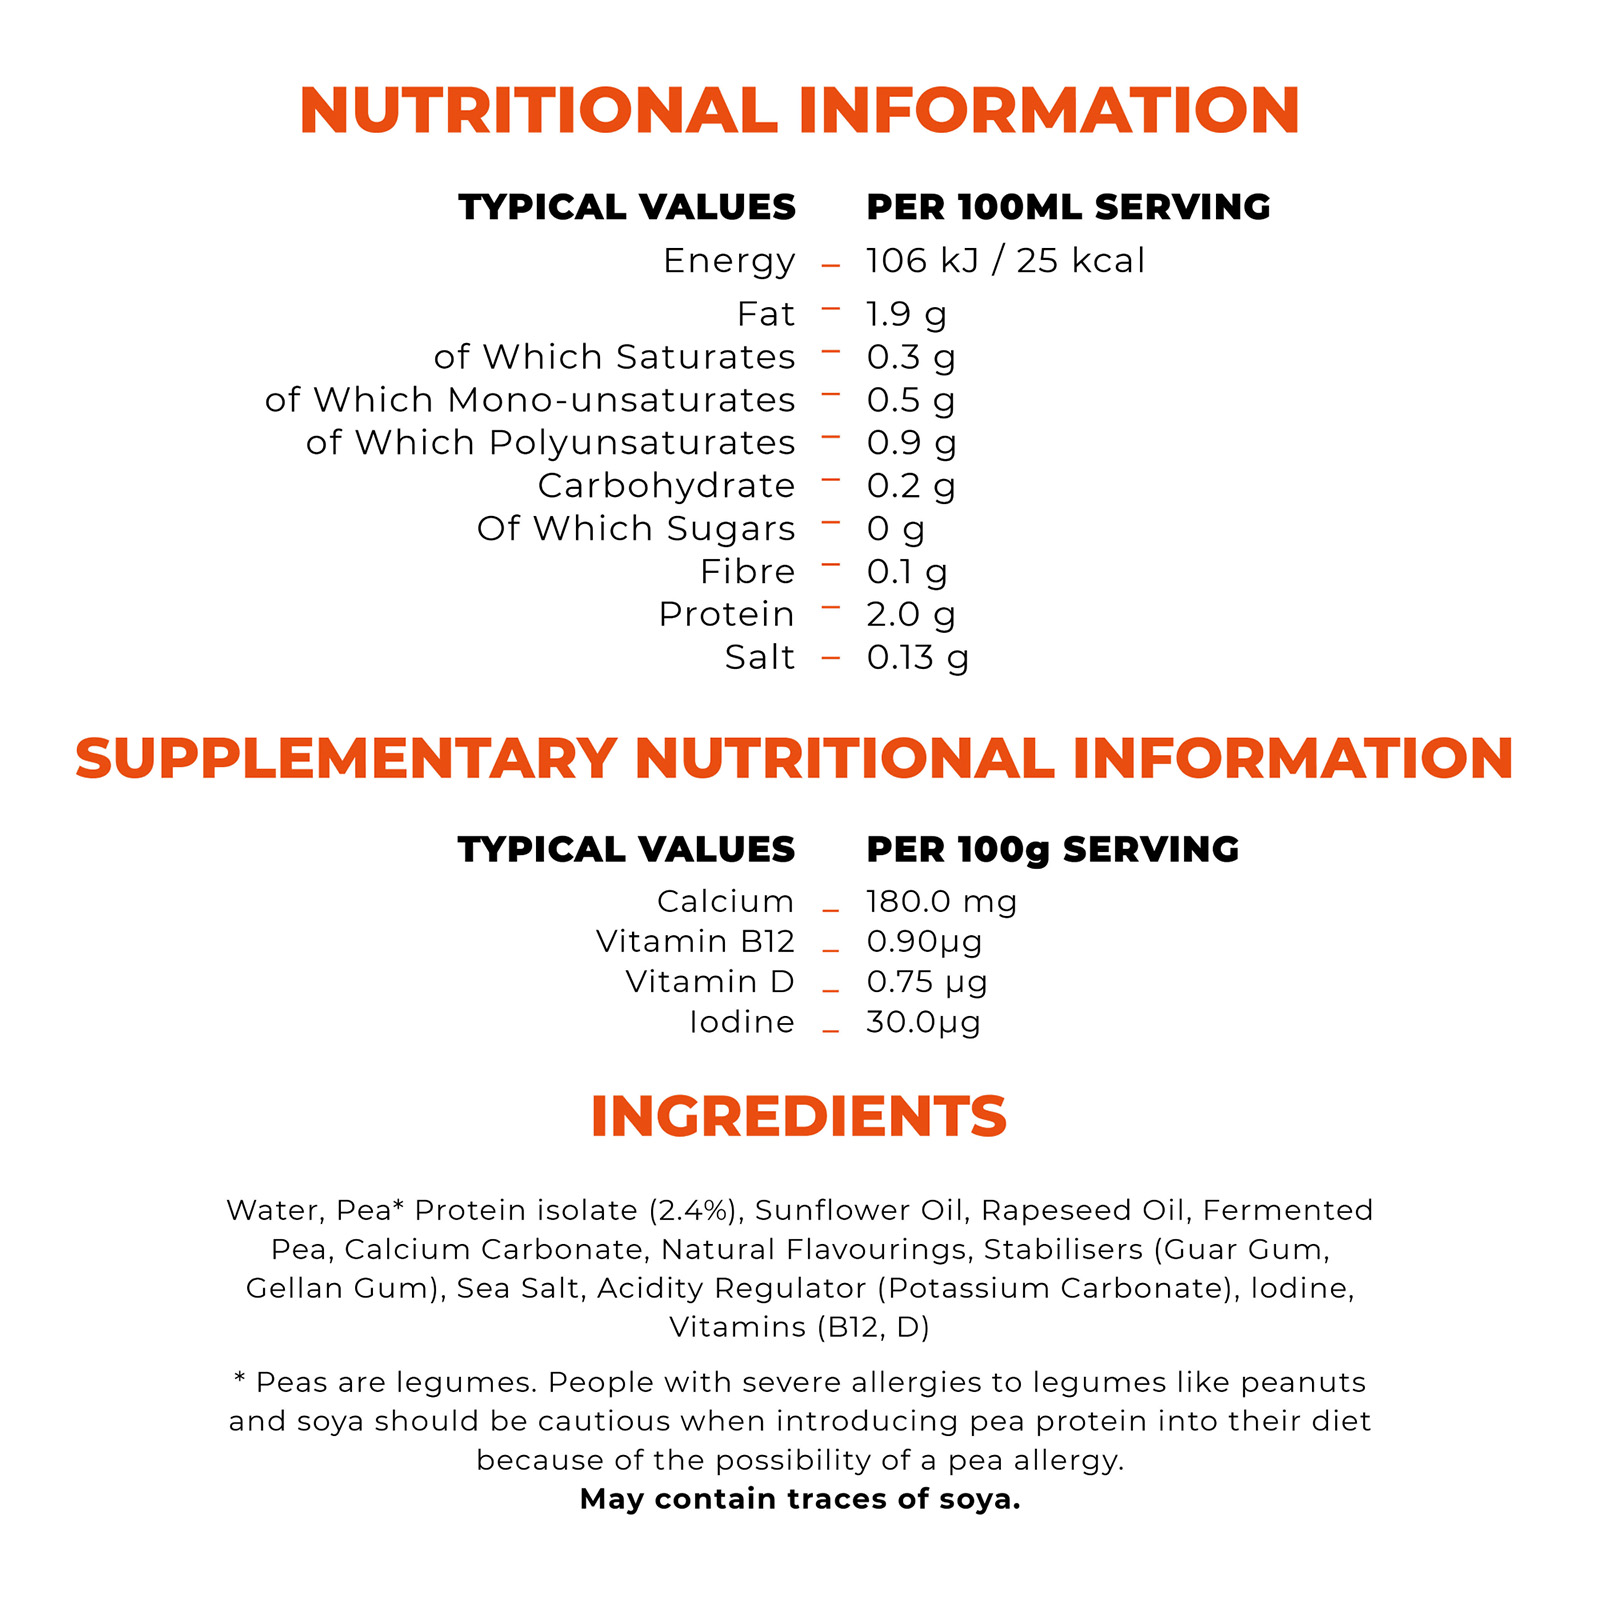 NUTRITIONAL INFORMATION
                                  PER 100ML SERVING
                                  106 kJ/25 kcal
                                  TYPICAL VALUES
                                  Energy
                                  Fat
                                  1.9 g
                                  of Which Saturates - 0.3 g
                                  0.5 g
                                  0.9 g
                                  0.2 g
                                  Og
                                  0.1 g
                                  2.0 g
                                  0.13 g
                                  of Which Mono-unsaturates
                                  of Which Polyunsaturates
                                  Carbohydrate
                                  Of Which Sugars
                                  Fibre
                                  Protein
                                  Salt
                                  -
                                  -
                                  SUPPLEMENTARY NUTRITIONAL INFORMATION
                                  TYPICAL VALUES
                                  Calcium
                                  PER 100g SERVING
                                  180.0 mg
                                  Vitamin B12
                                  0.90μg
                                  Vitamin D – 0.75 μg
                                  lodine
                                  30.0μg
                                  INGREDIENTS
                                  Water, Pea* Protein isolate (2.4%), Sunflower Oil, Rapeseed Oil, Fermented
                                  Pea, Calcium Carbonate, Natural Flavourings, Stabilisers (Guar Gum,
                                  Gellan Gum), Sea Salt, Acidity Regulator (Potassium Carbonate), lodine,
                                  Vitamins (B12, D)
                                  Peas are legumes. People with severe allergies to legumes like peanuts
                                  and soya should be cautious when introducing pea protein into their diet
                                  because of the possibility of a pea allergy.
                                  May contain traces of soya.
                                  